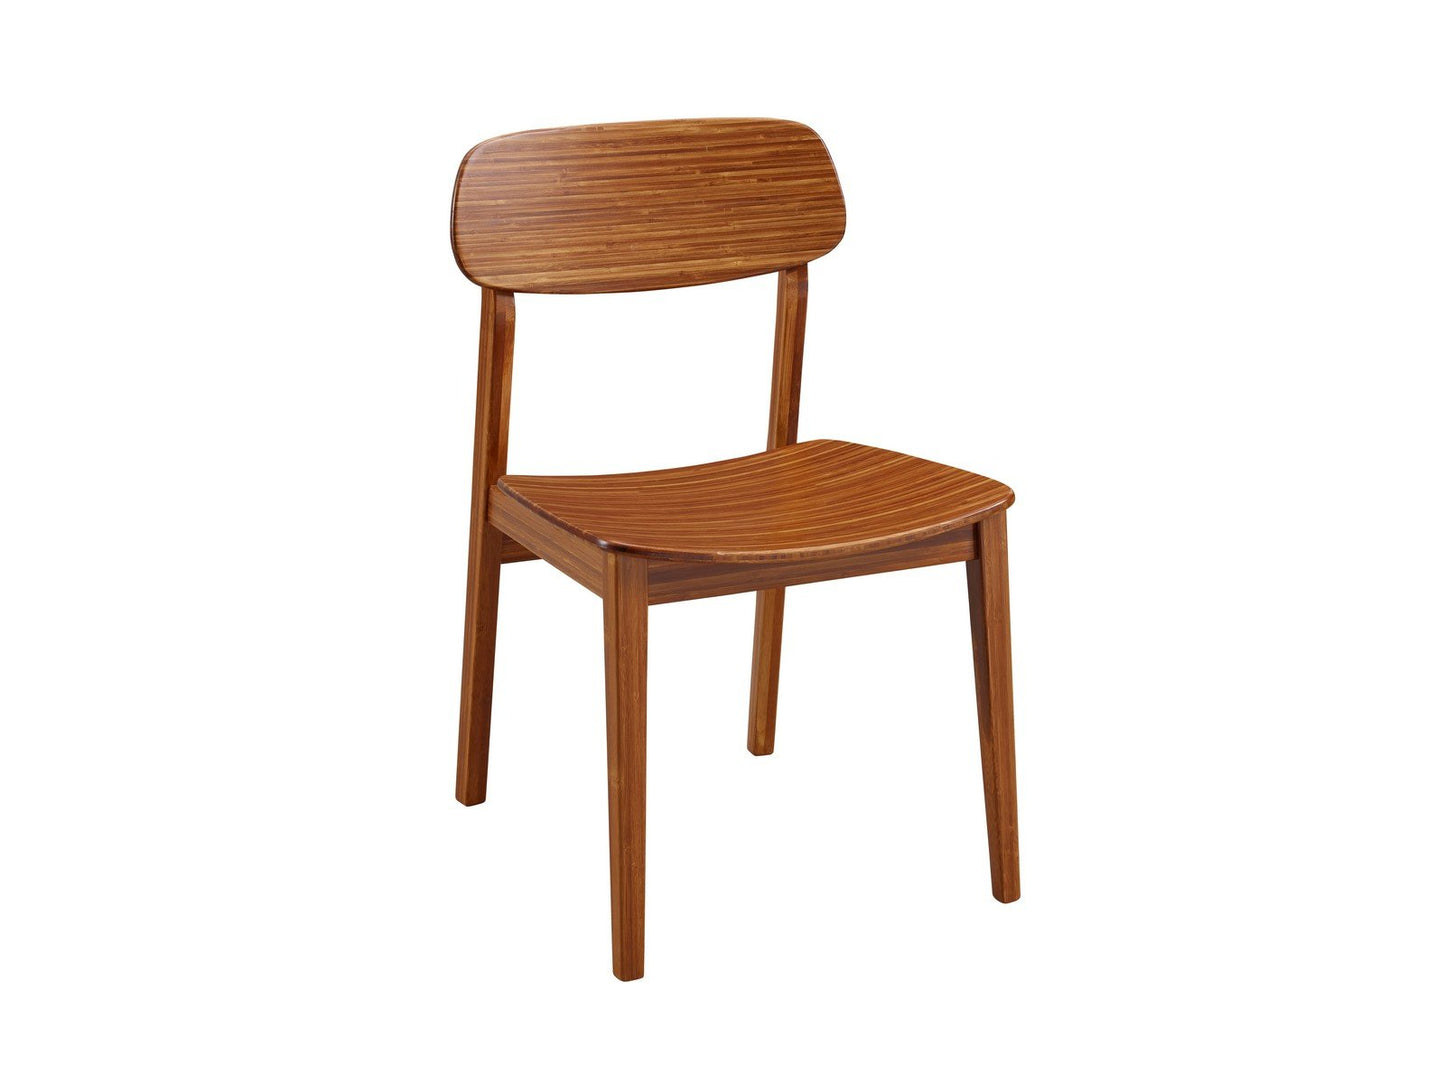 Greenington Currant Chair - Boxed set of 2, Amber - G0023AM - 1